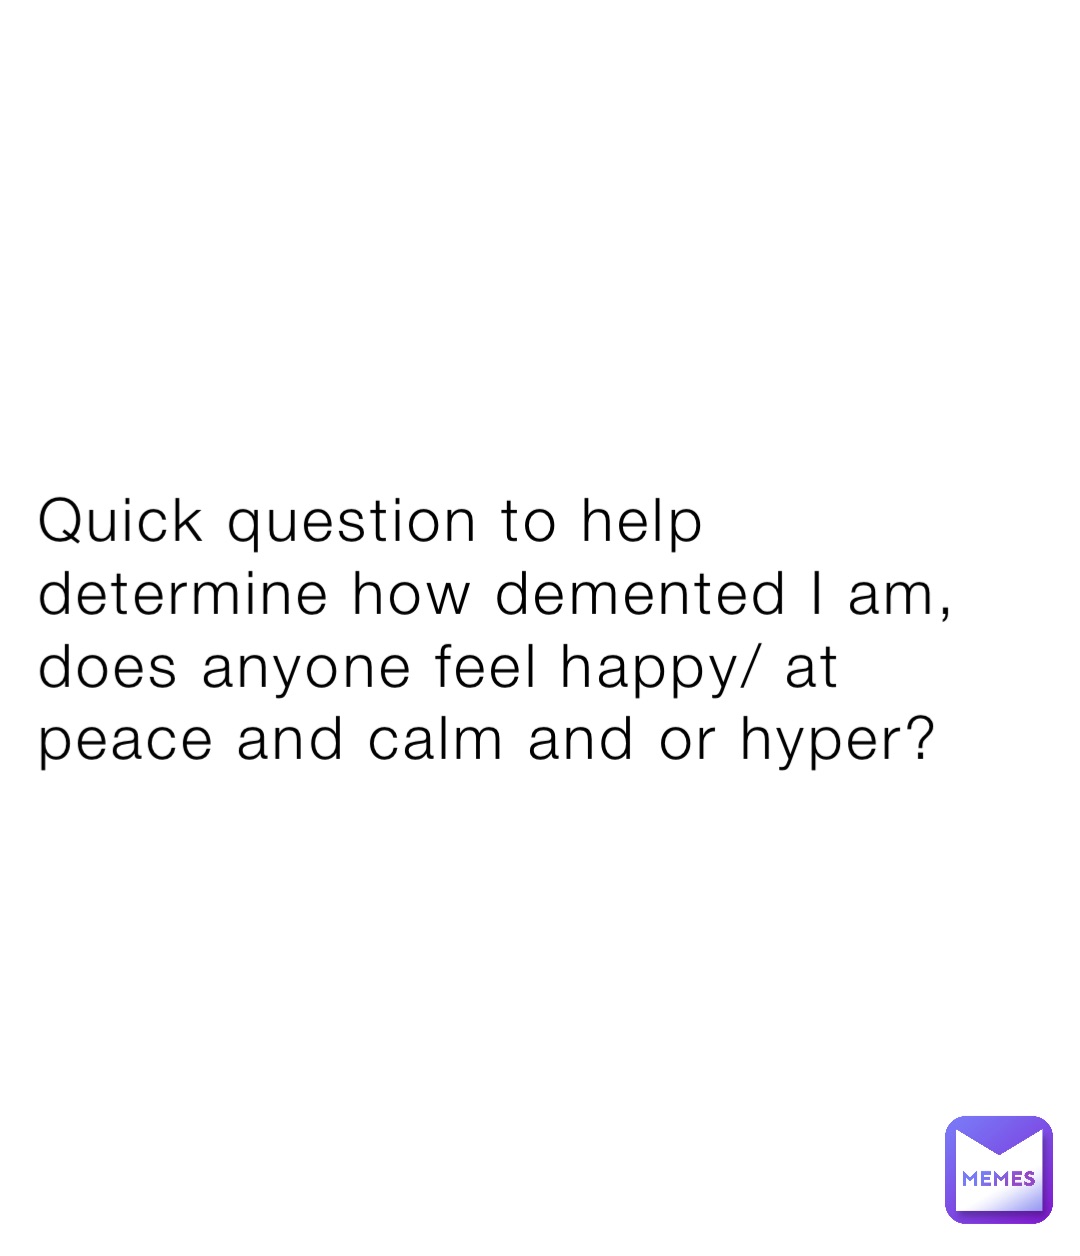 Quick question to help determine how demented I am, does anyone feel happy/ at peace and calm and or hyper?